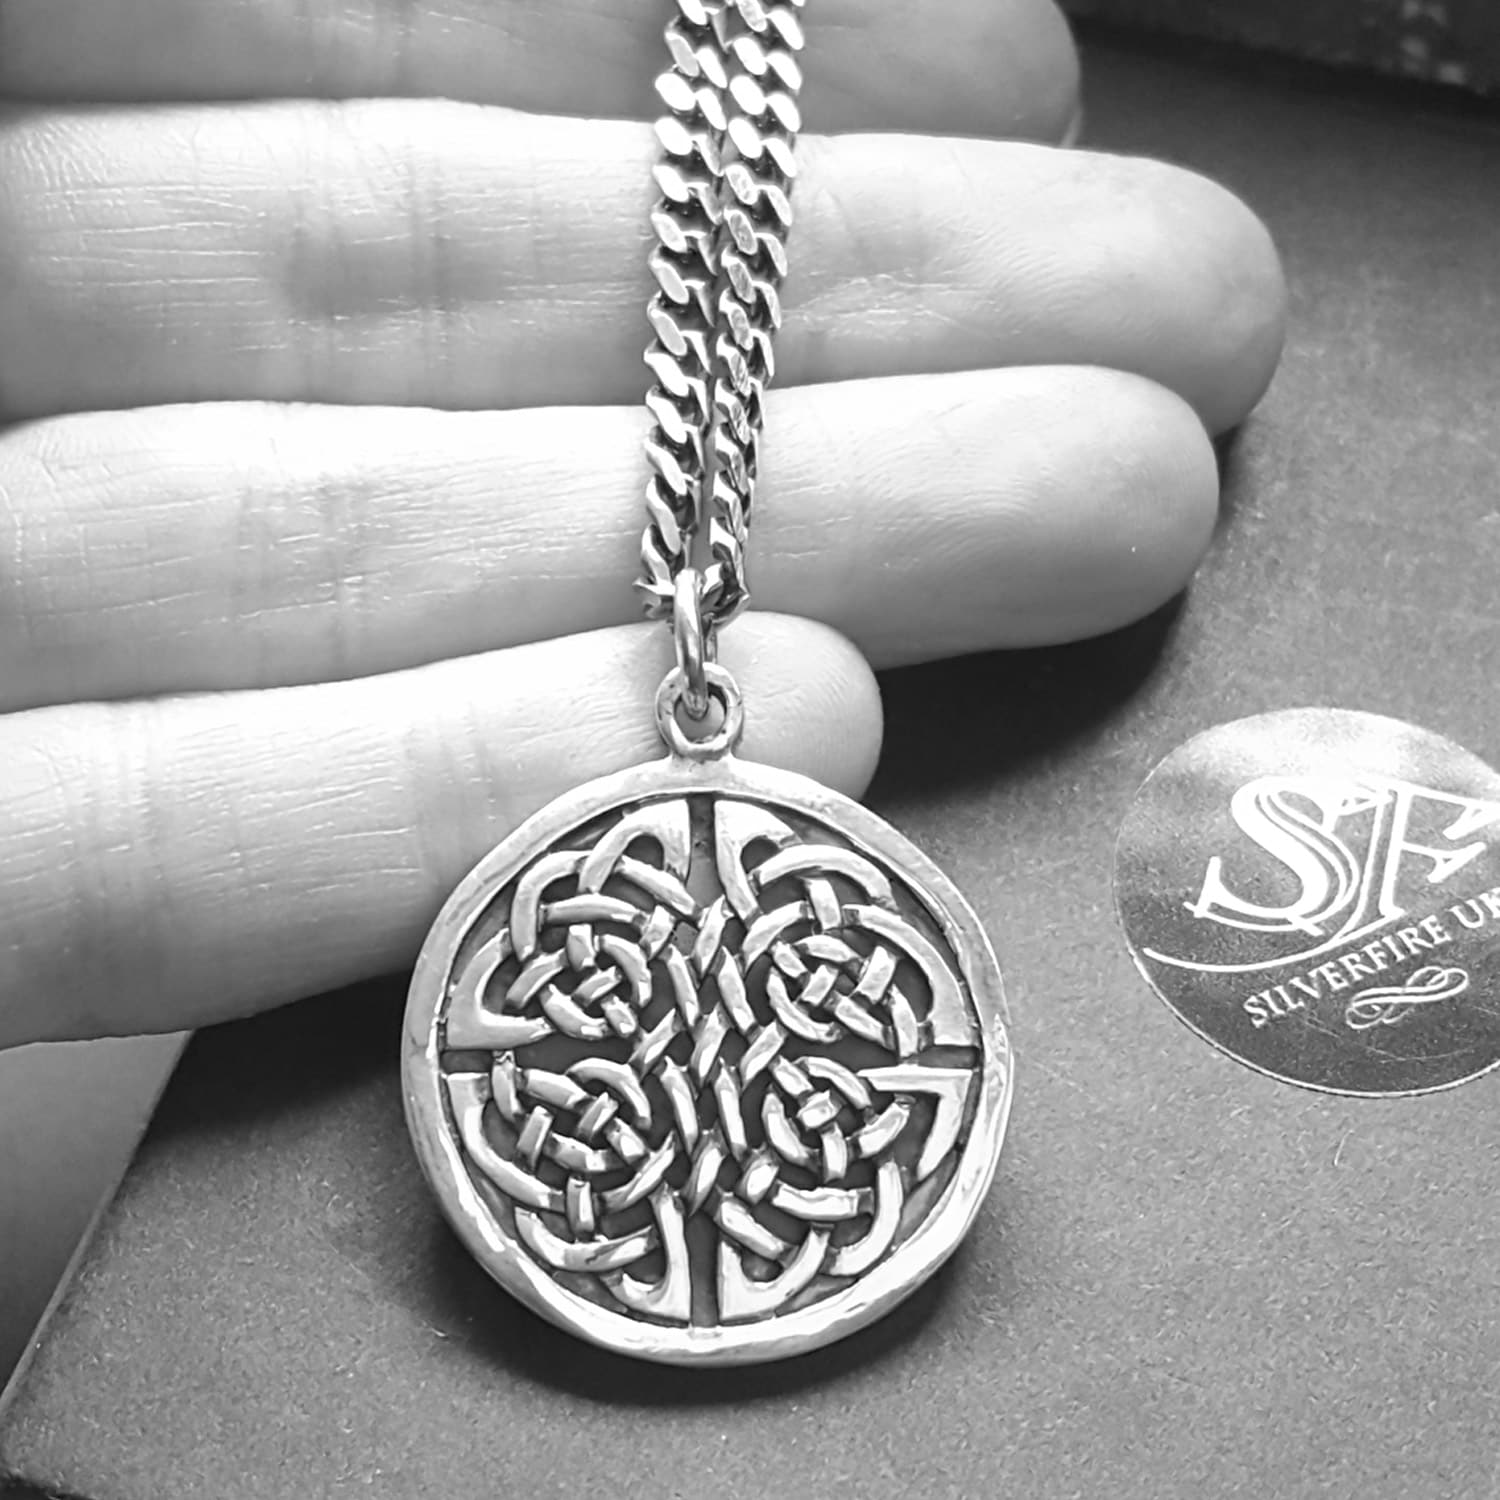 Mens Irish Witches Celtic Trinity Knot Cross 4-Pointed Wiccan Pendant  Necklace | eBay